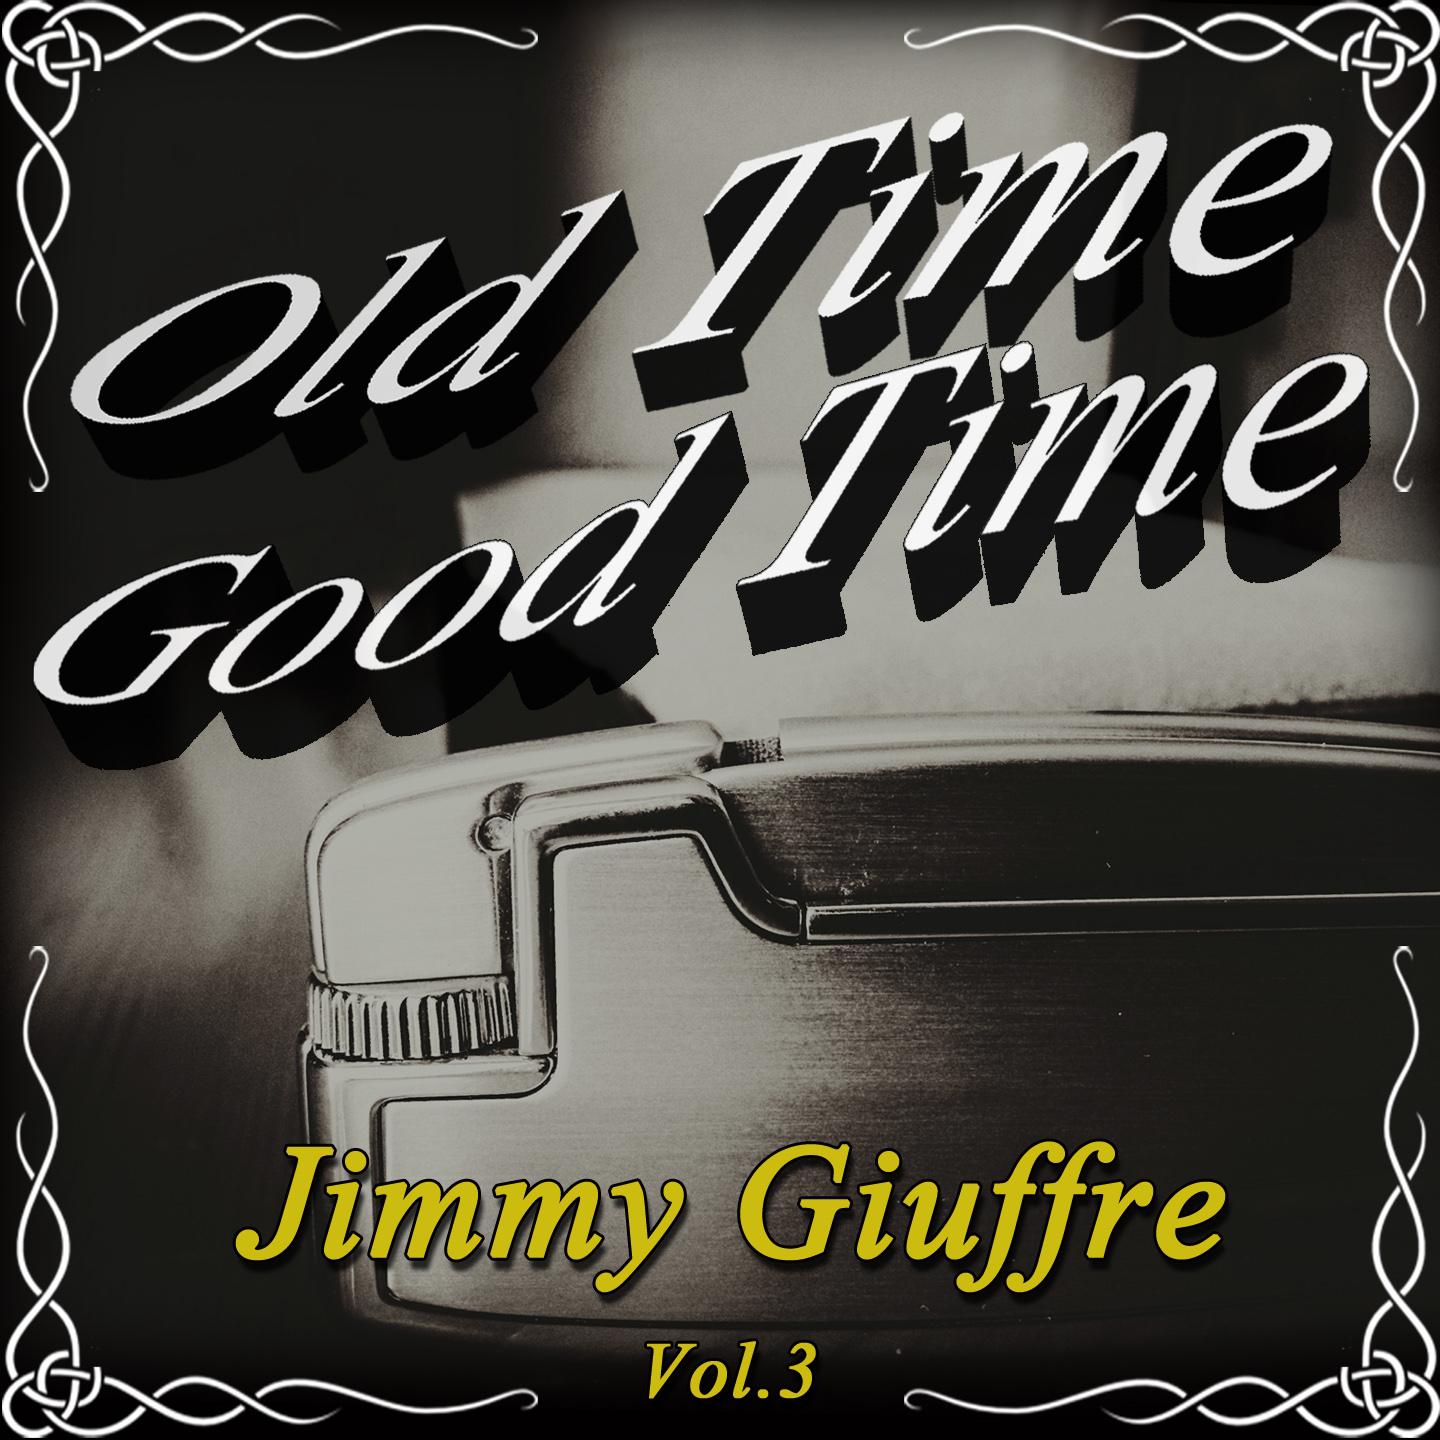 Old Time Good Time: Jimmy Giuffre, Vol. 3